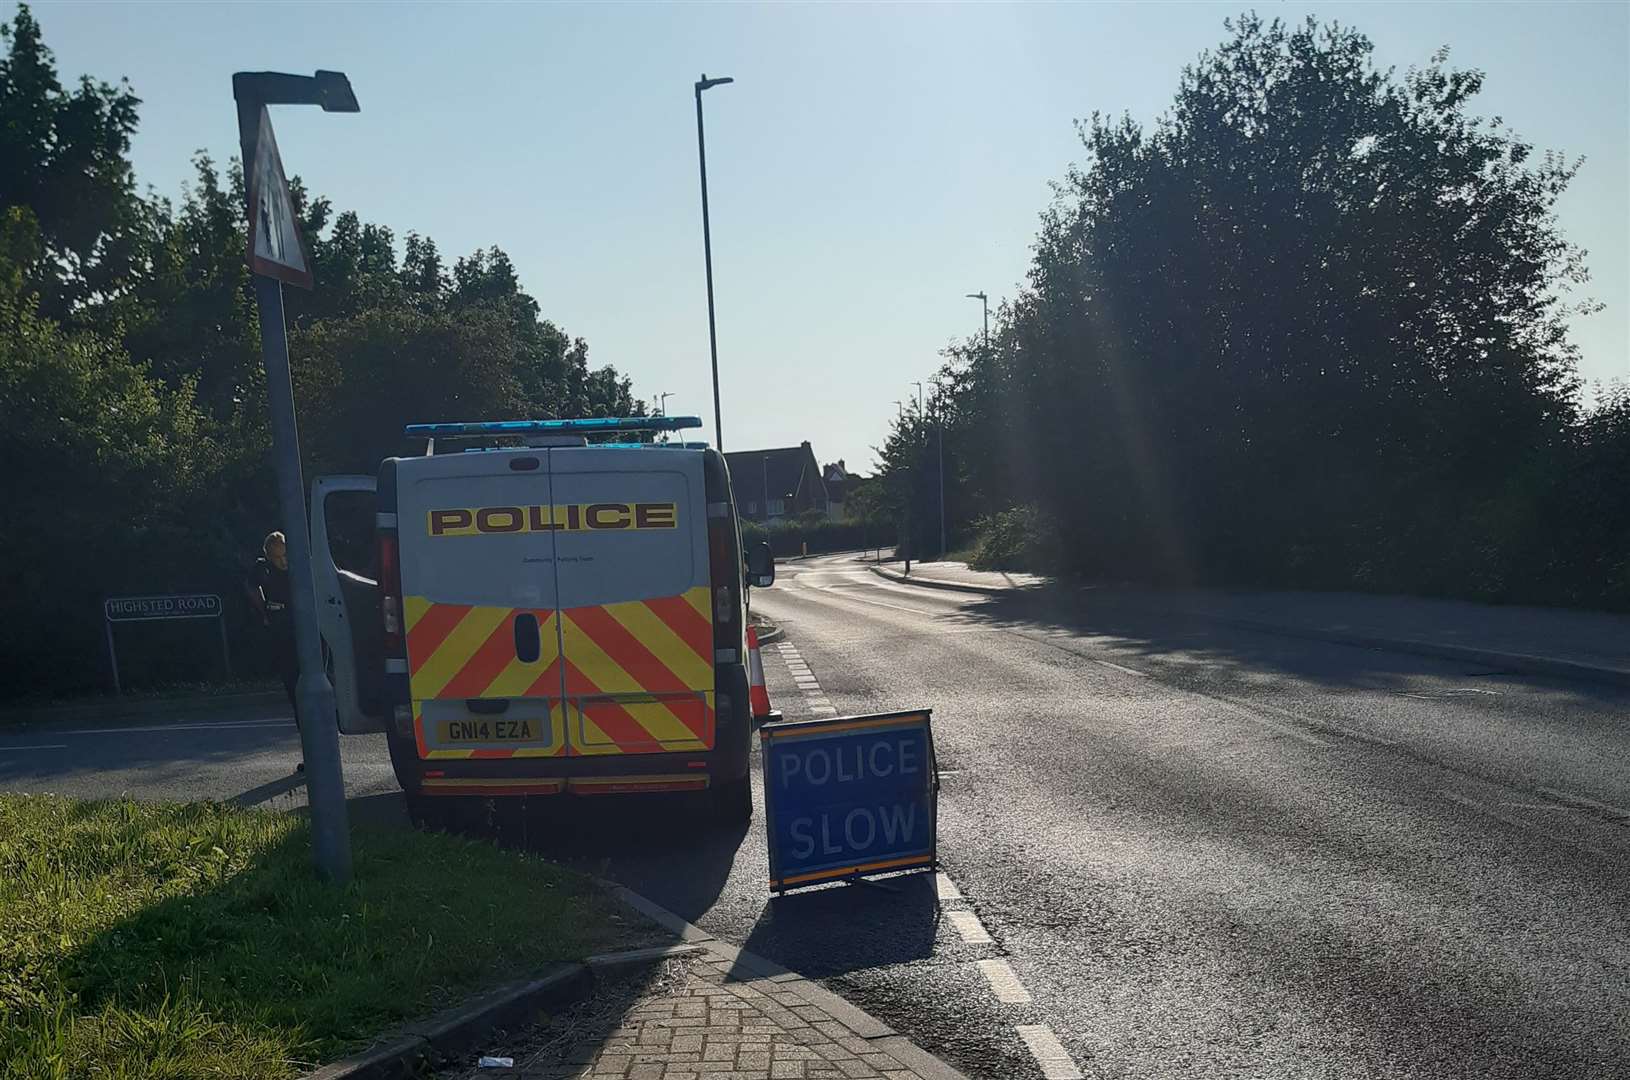 A police van blocking traffic going into Highsted Road at Chilton Manor Farm, Sittingbourne